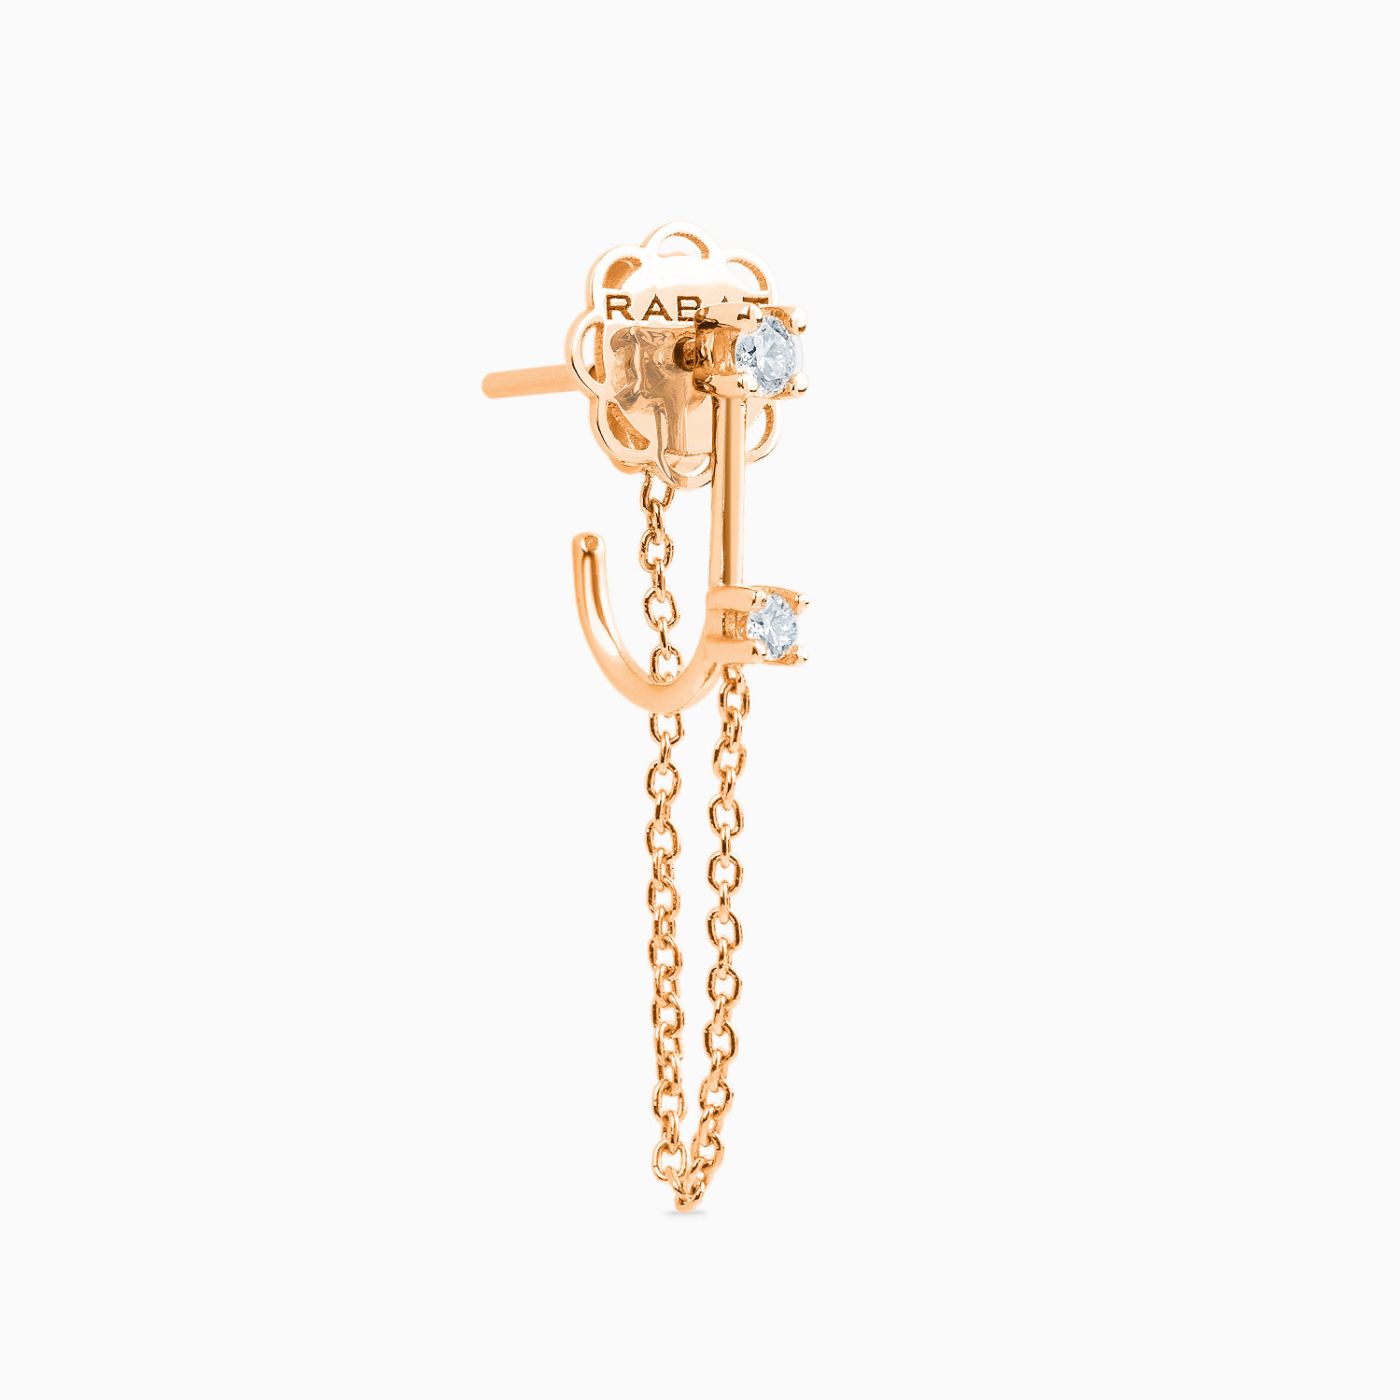 Half rose gold chain earrings with diamonds